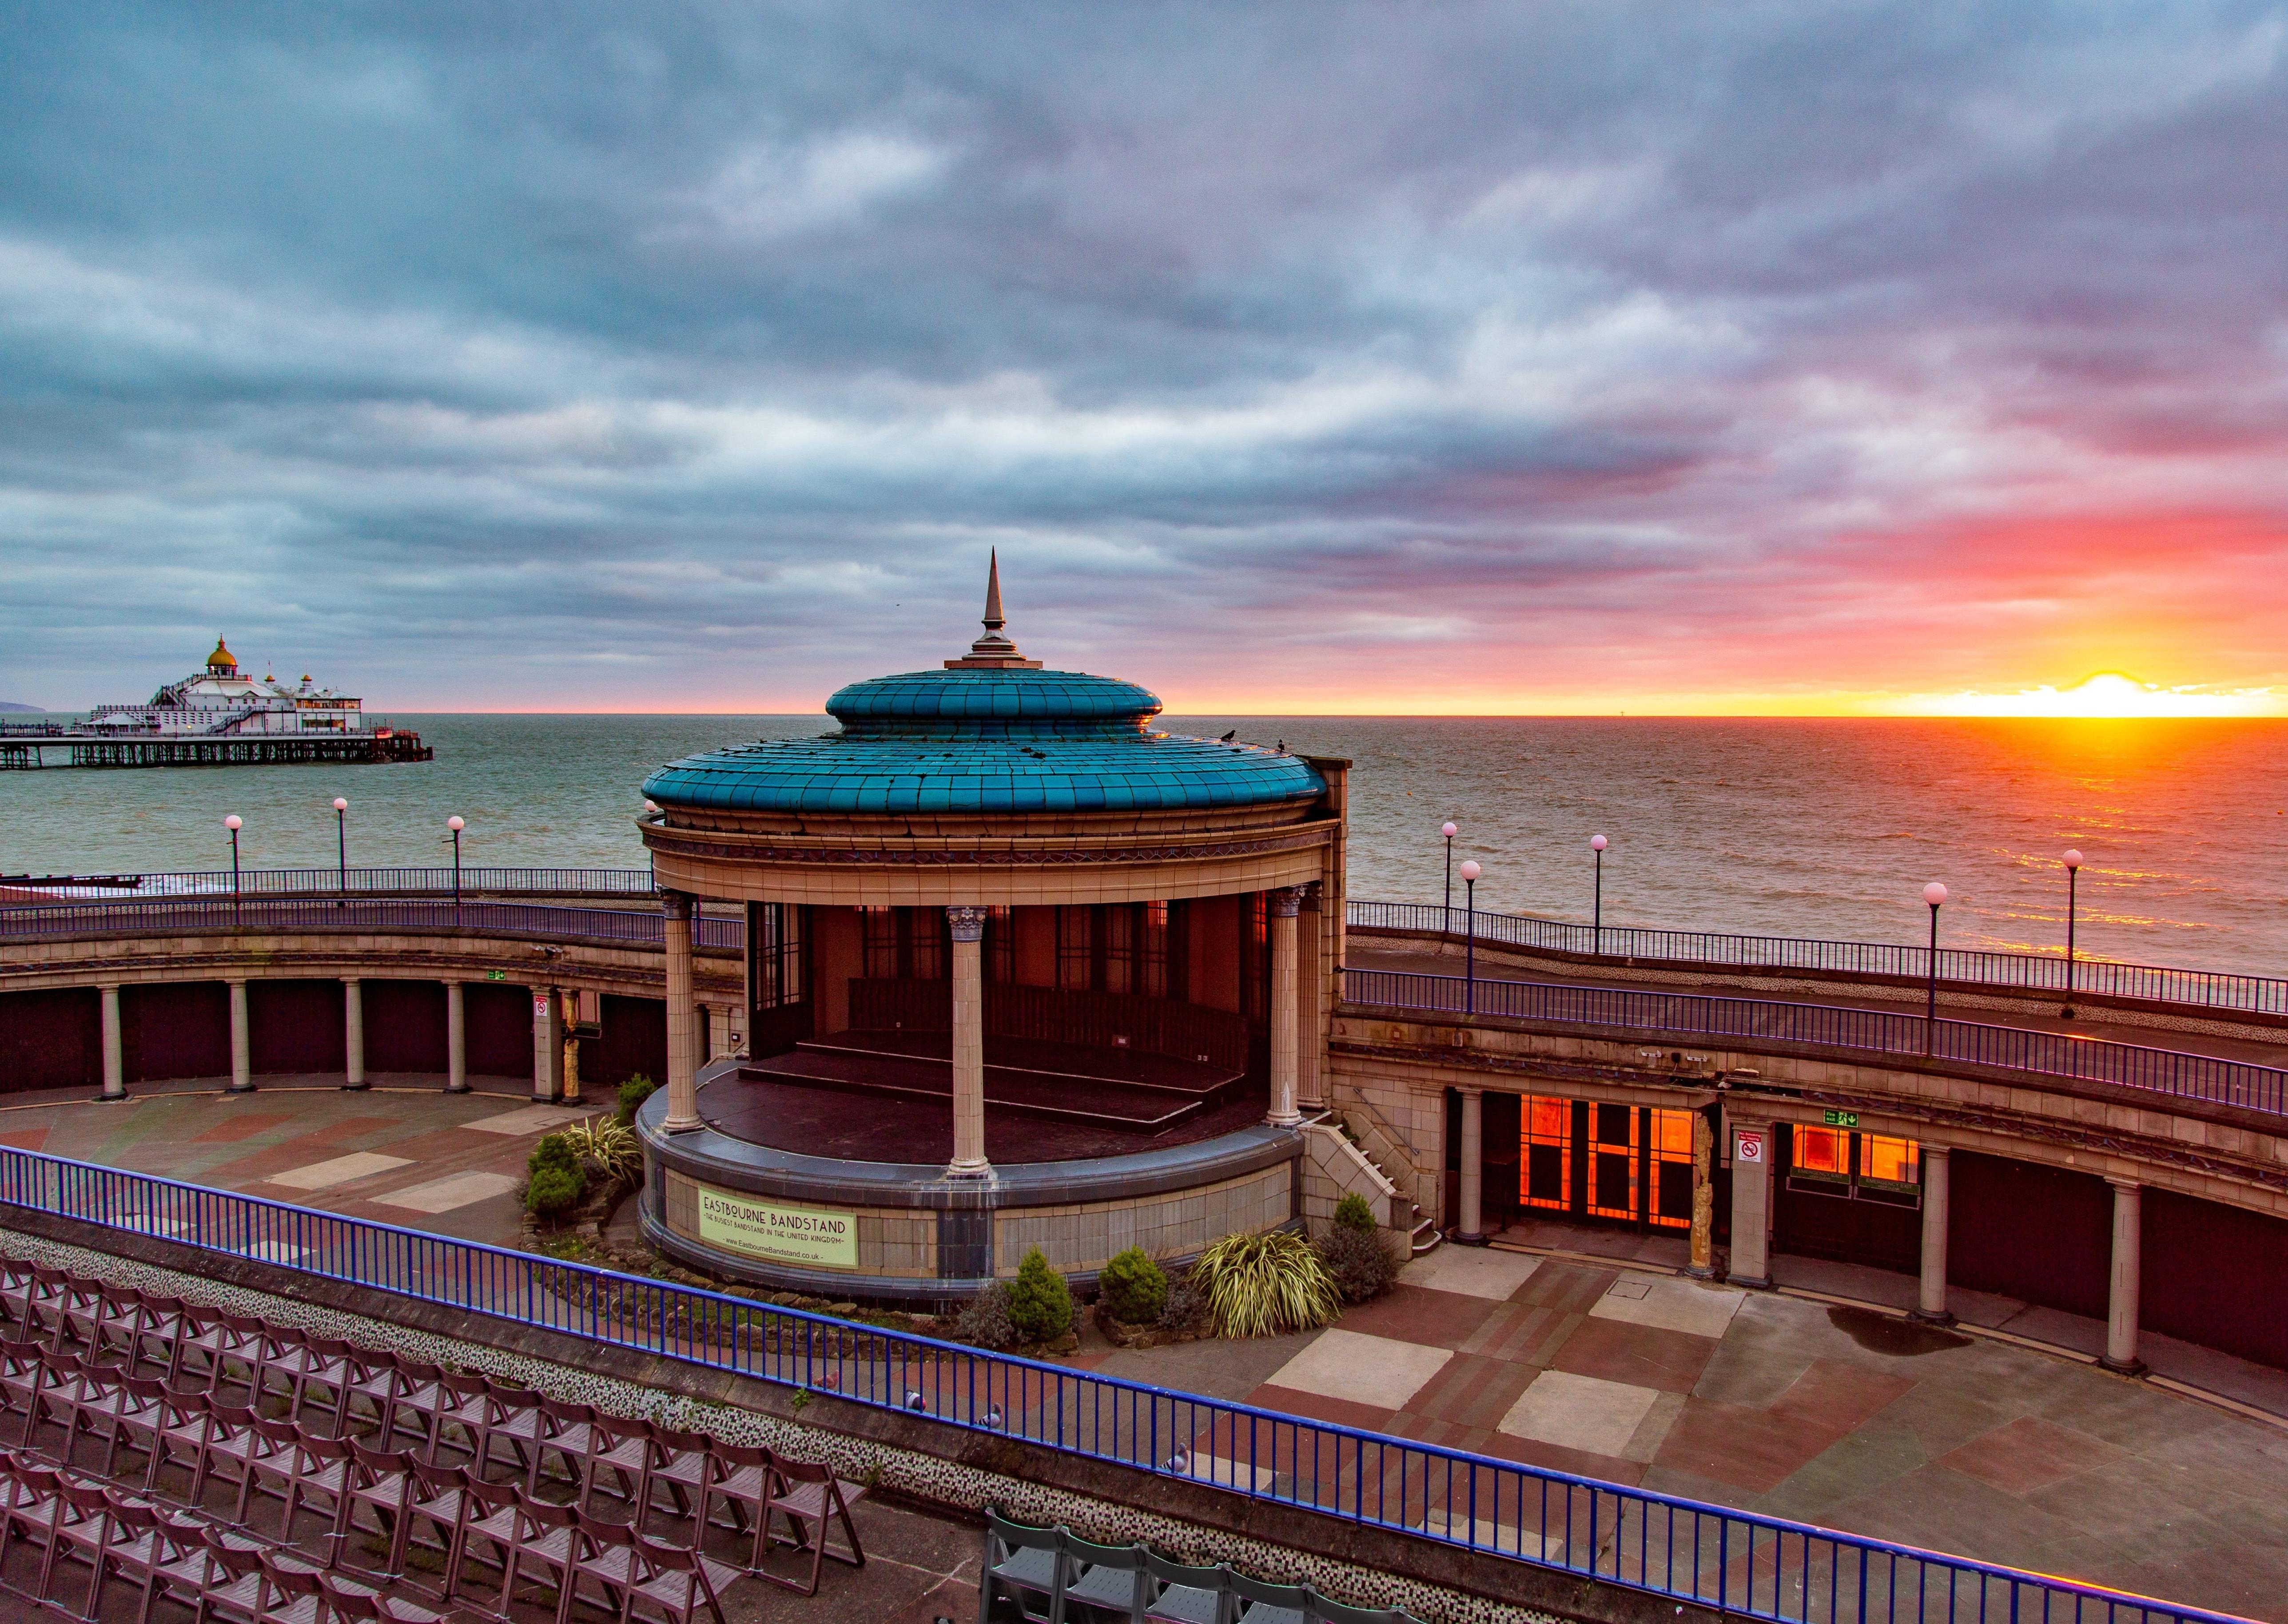 The winter sun rising on a cold January morning over the pier and bandstand. This photograph was taken by Barry Davis on a Canon eos 5d mark iii. SUS-200129-111652001